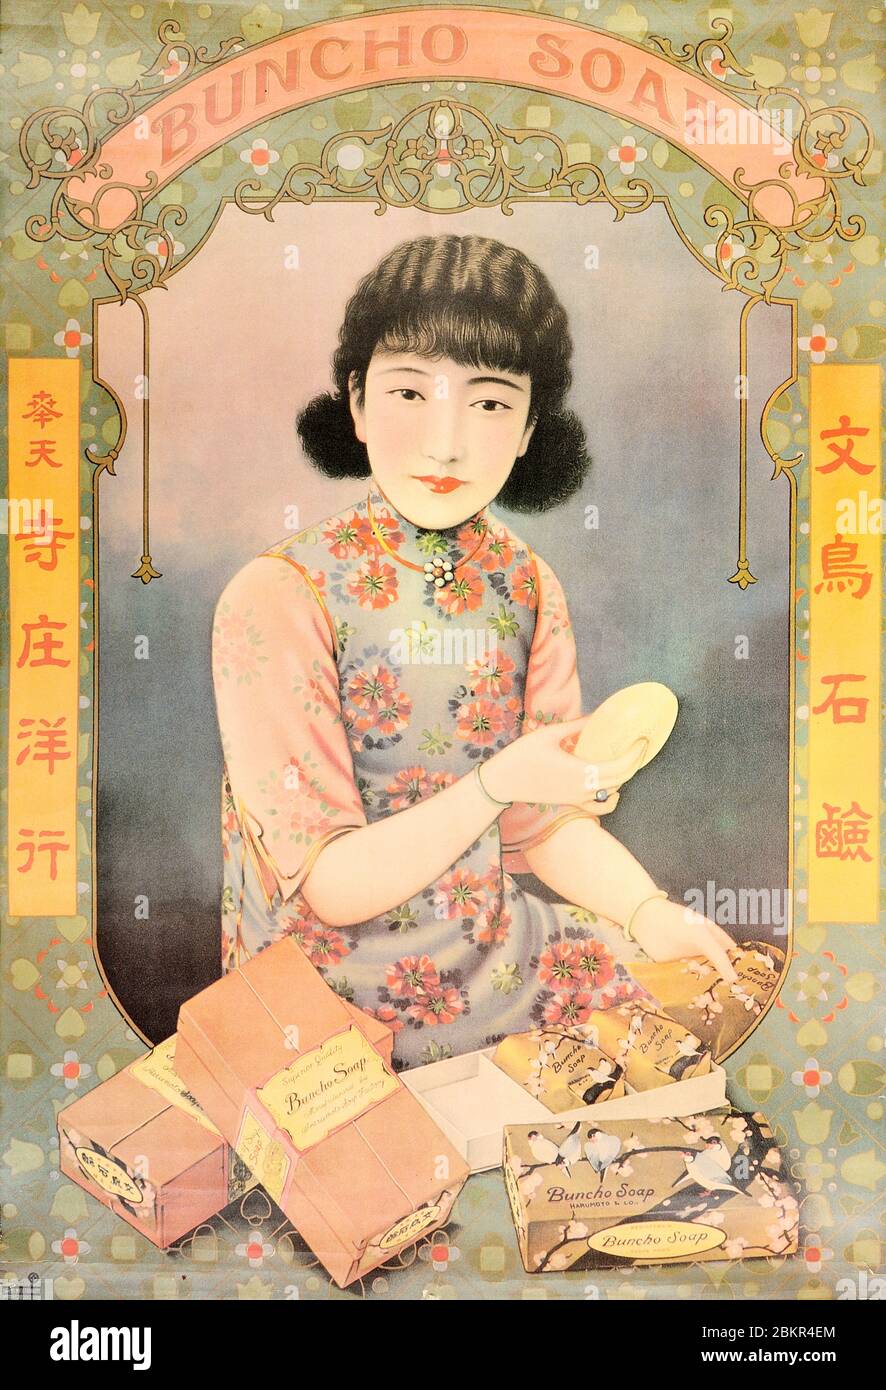 [ 1930s Japan - Advertising for Japanese Soap ] —   Advertising poster for Buncho Soap (文鳥石鹸) dating from the 1930s. The poster was created for the Chinese market. A woman with a modern hairstyle wearing a Chinese dress holds a bar of soap.  20th century vintage advertising poster. Stock Photo